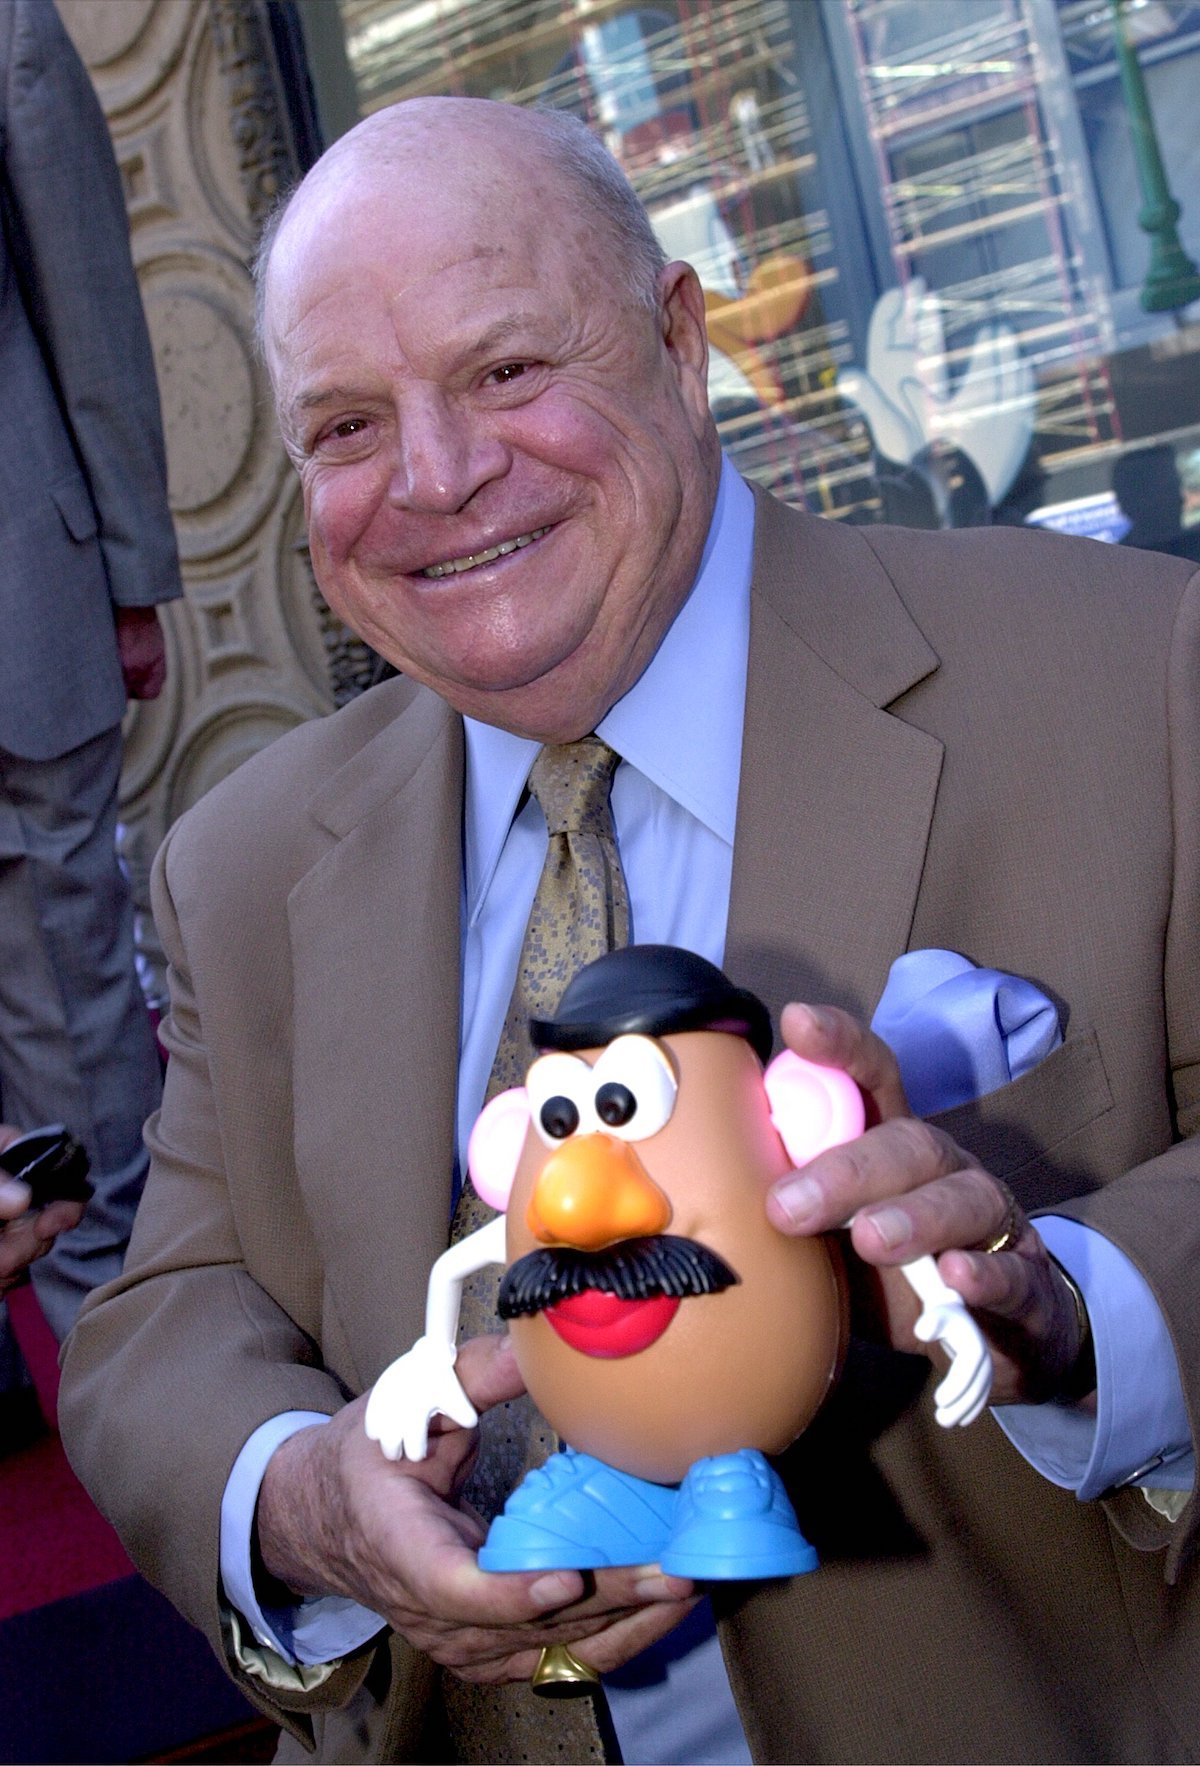 Don Rickles holds a "Mr. Potato Head" doll